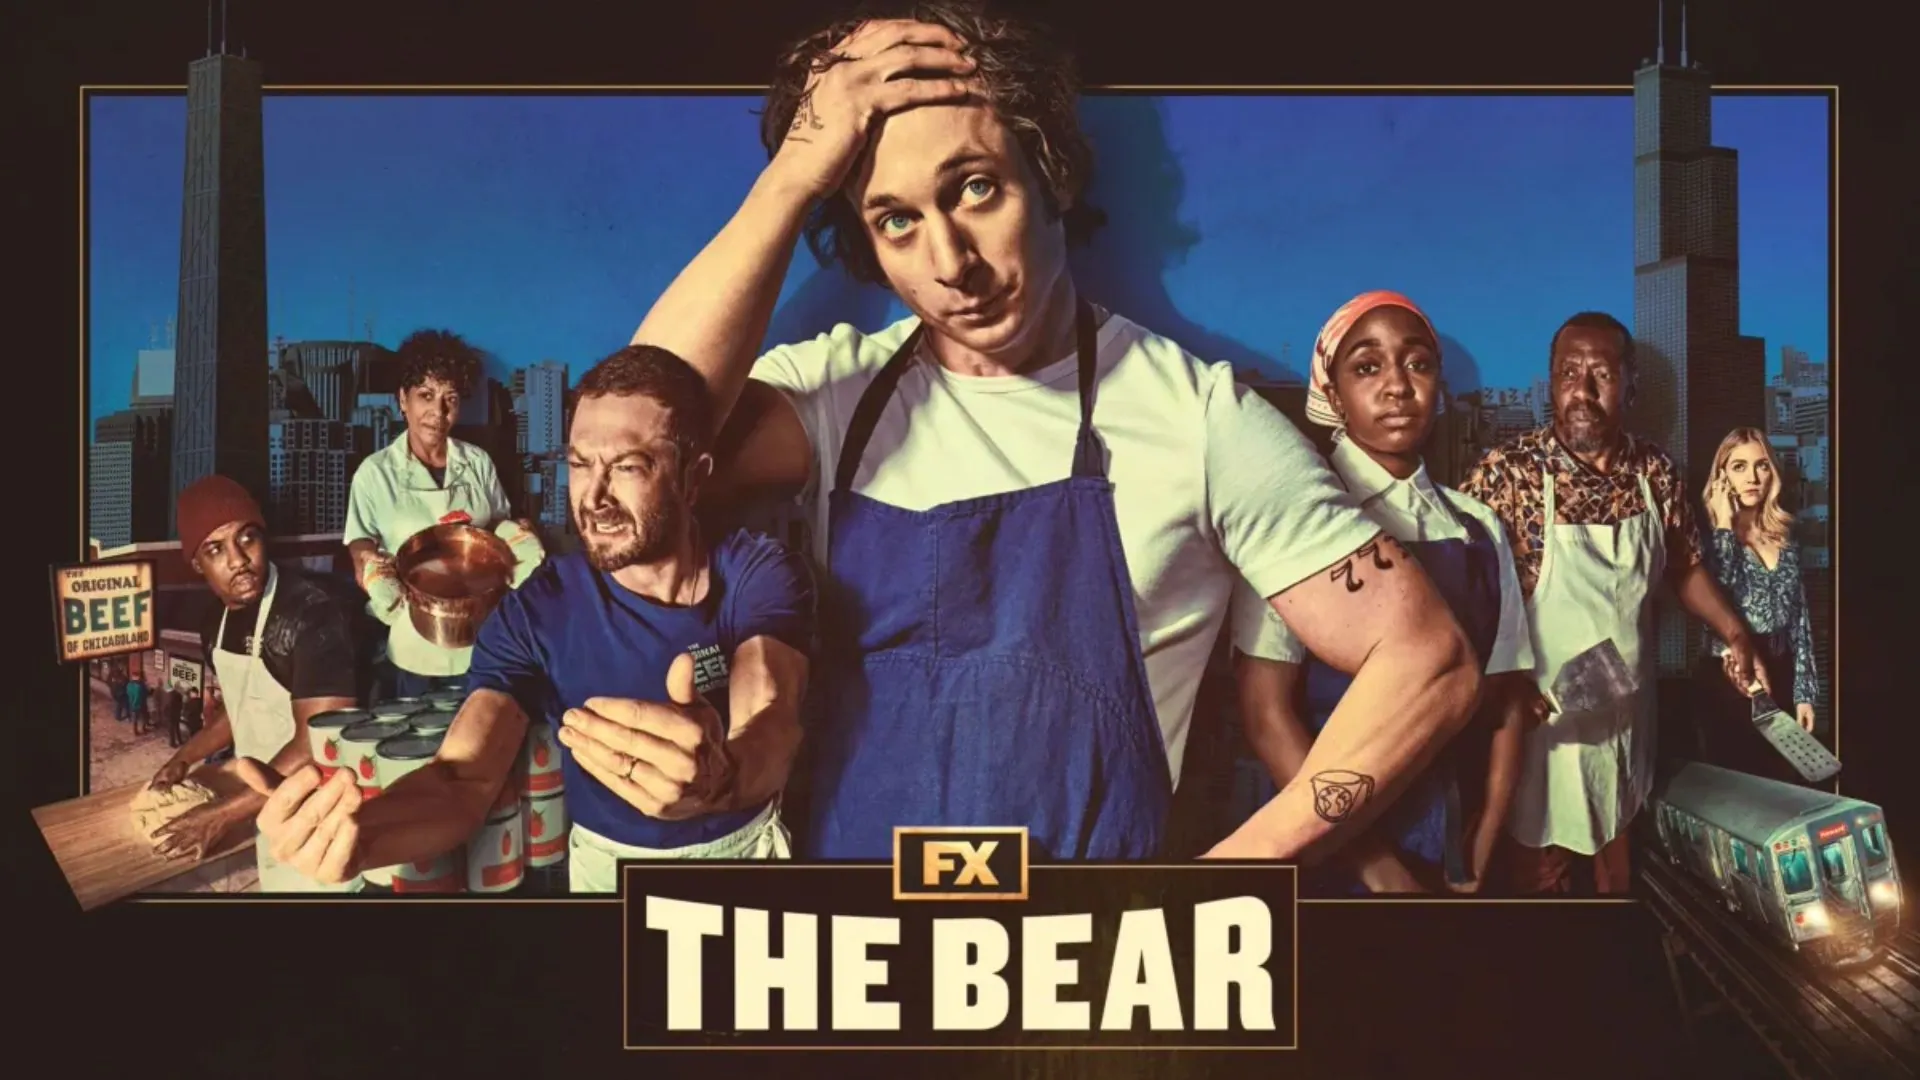 More "The Bear" is Coming! Beloved Comedy Renewed for Seasons 3 and 4